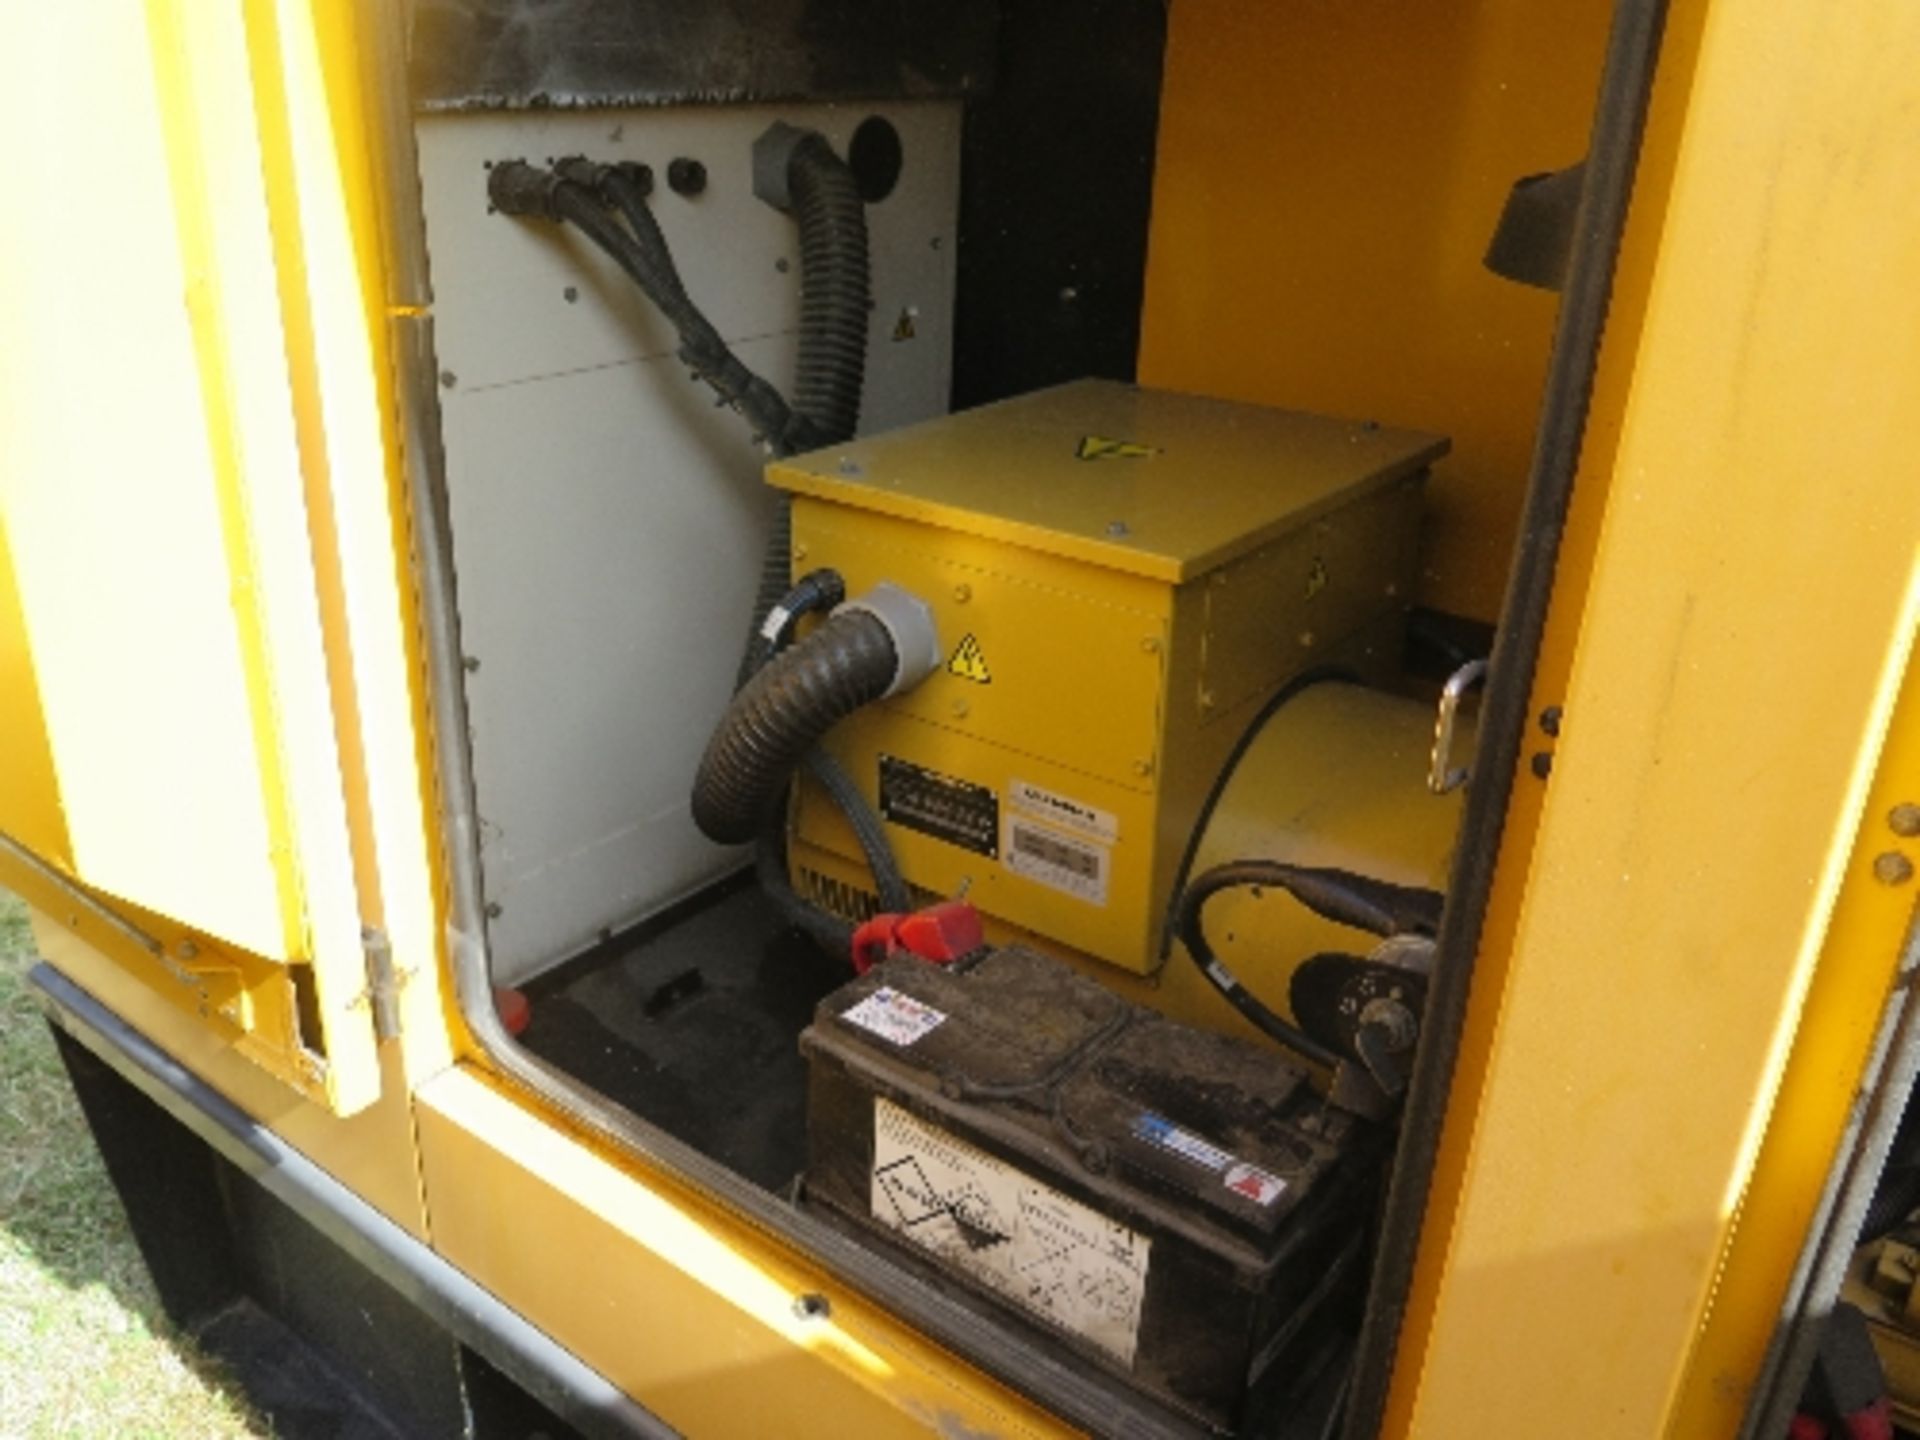 Caterpillar XQE80 generator 15335 hrs 157815
PERKINS - RUNS AND MAKES POWER
ALL LOTS are SOLD AS - Image 6 of 6